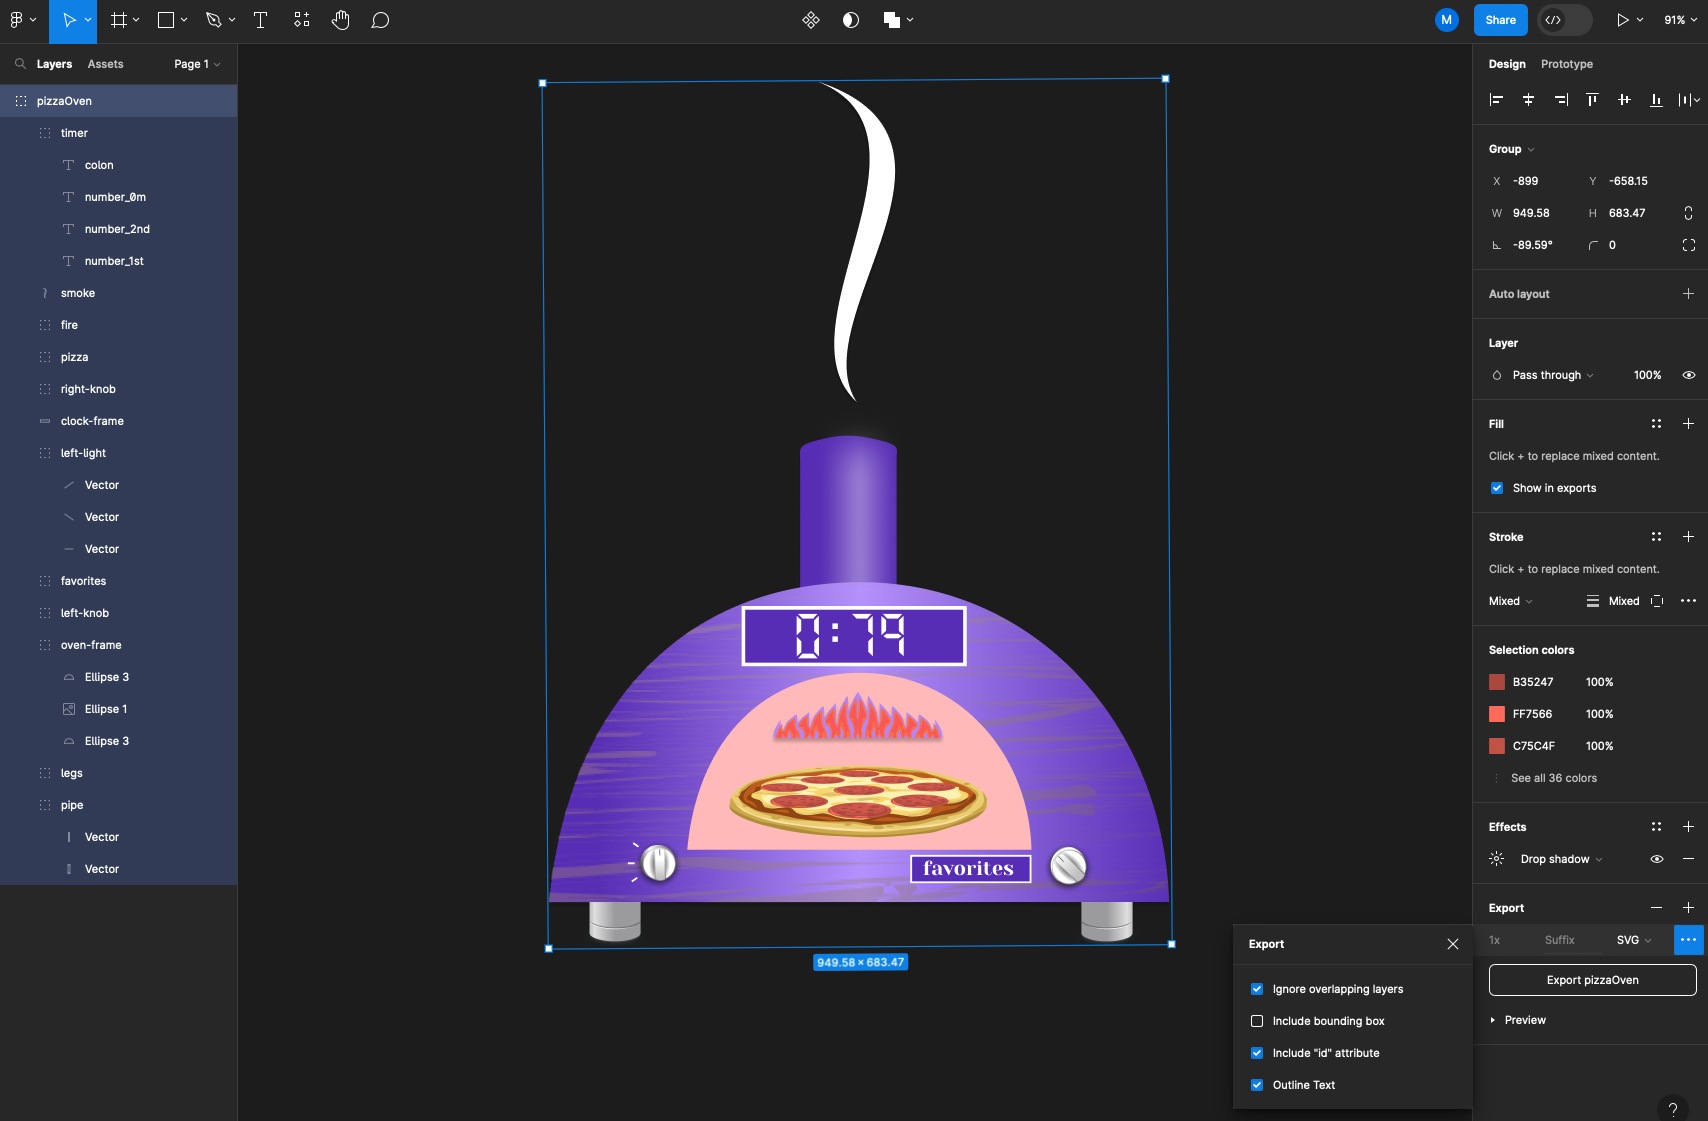 Pizza oven was exported as transparent SVG with id attribute to identify layers.